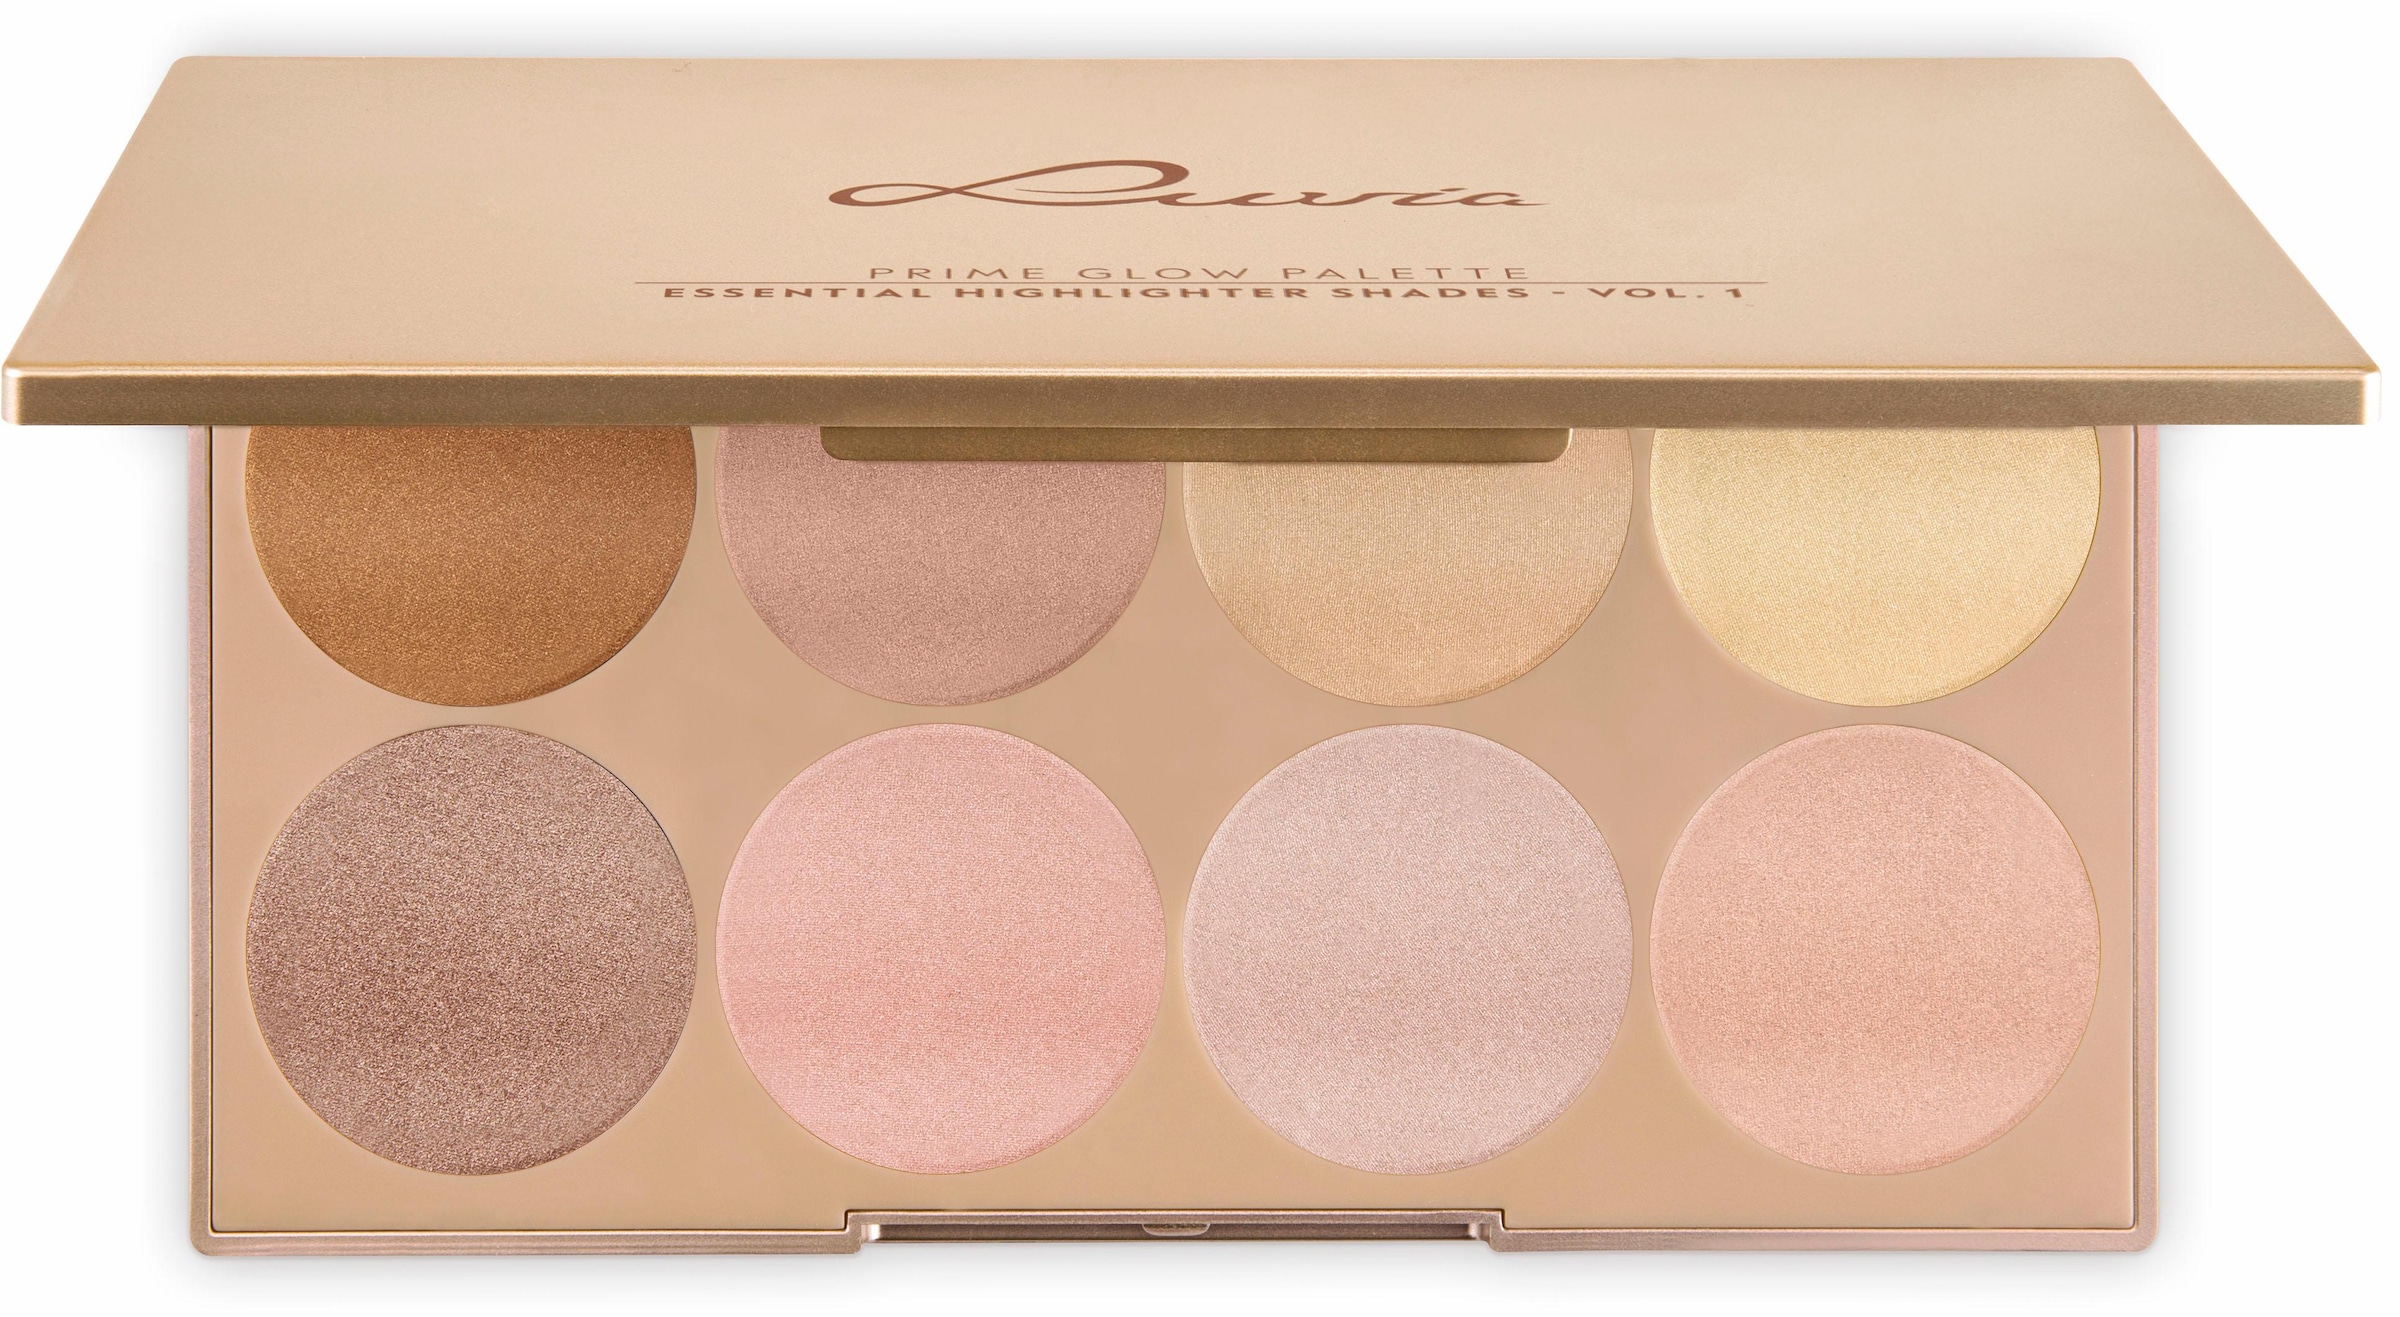 Luvia Cosmetics Highlighter-Palette »Prime Glow Essential Contouring Shades  Vol. 1« (8 tlg.) 8 Farben